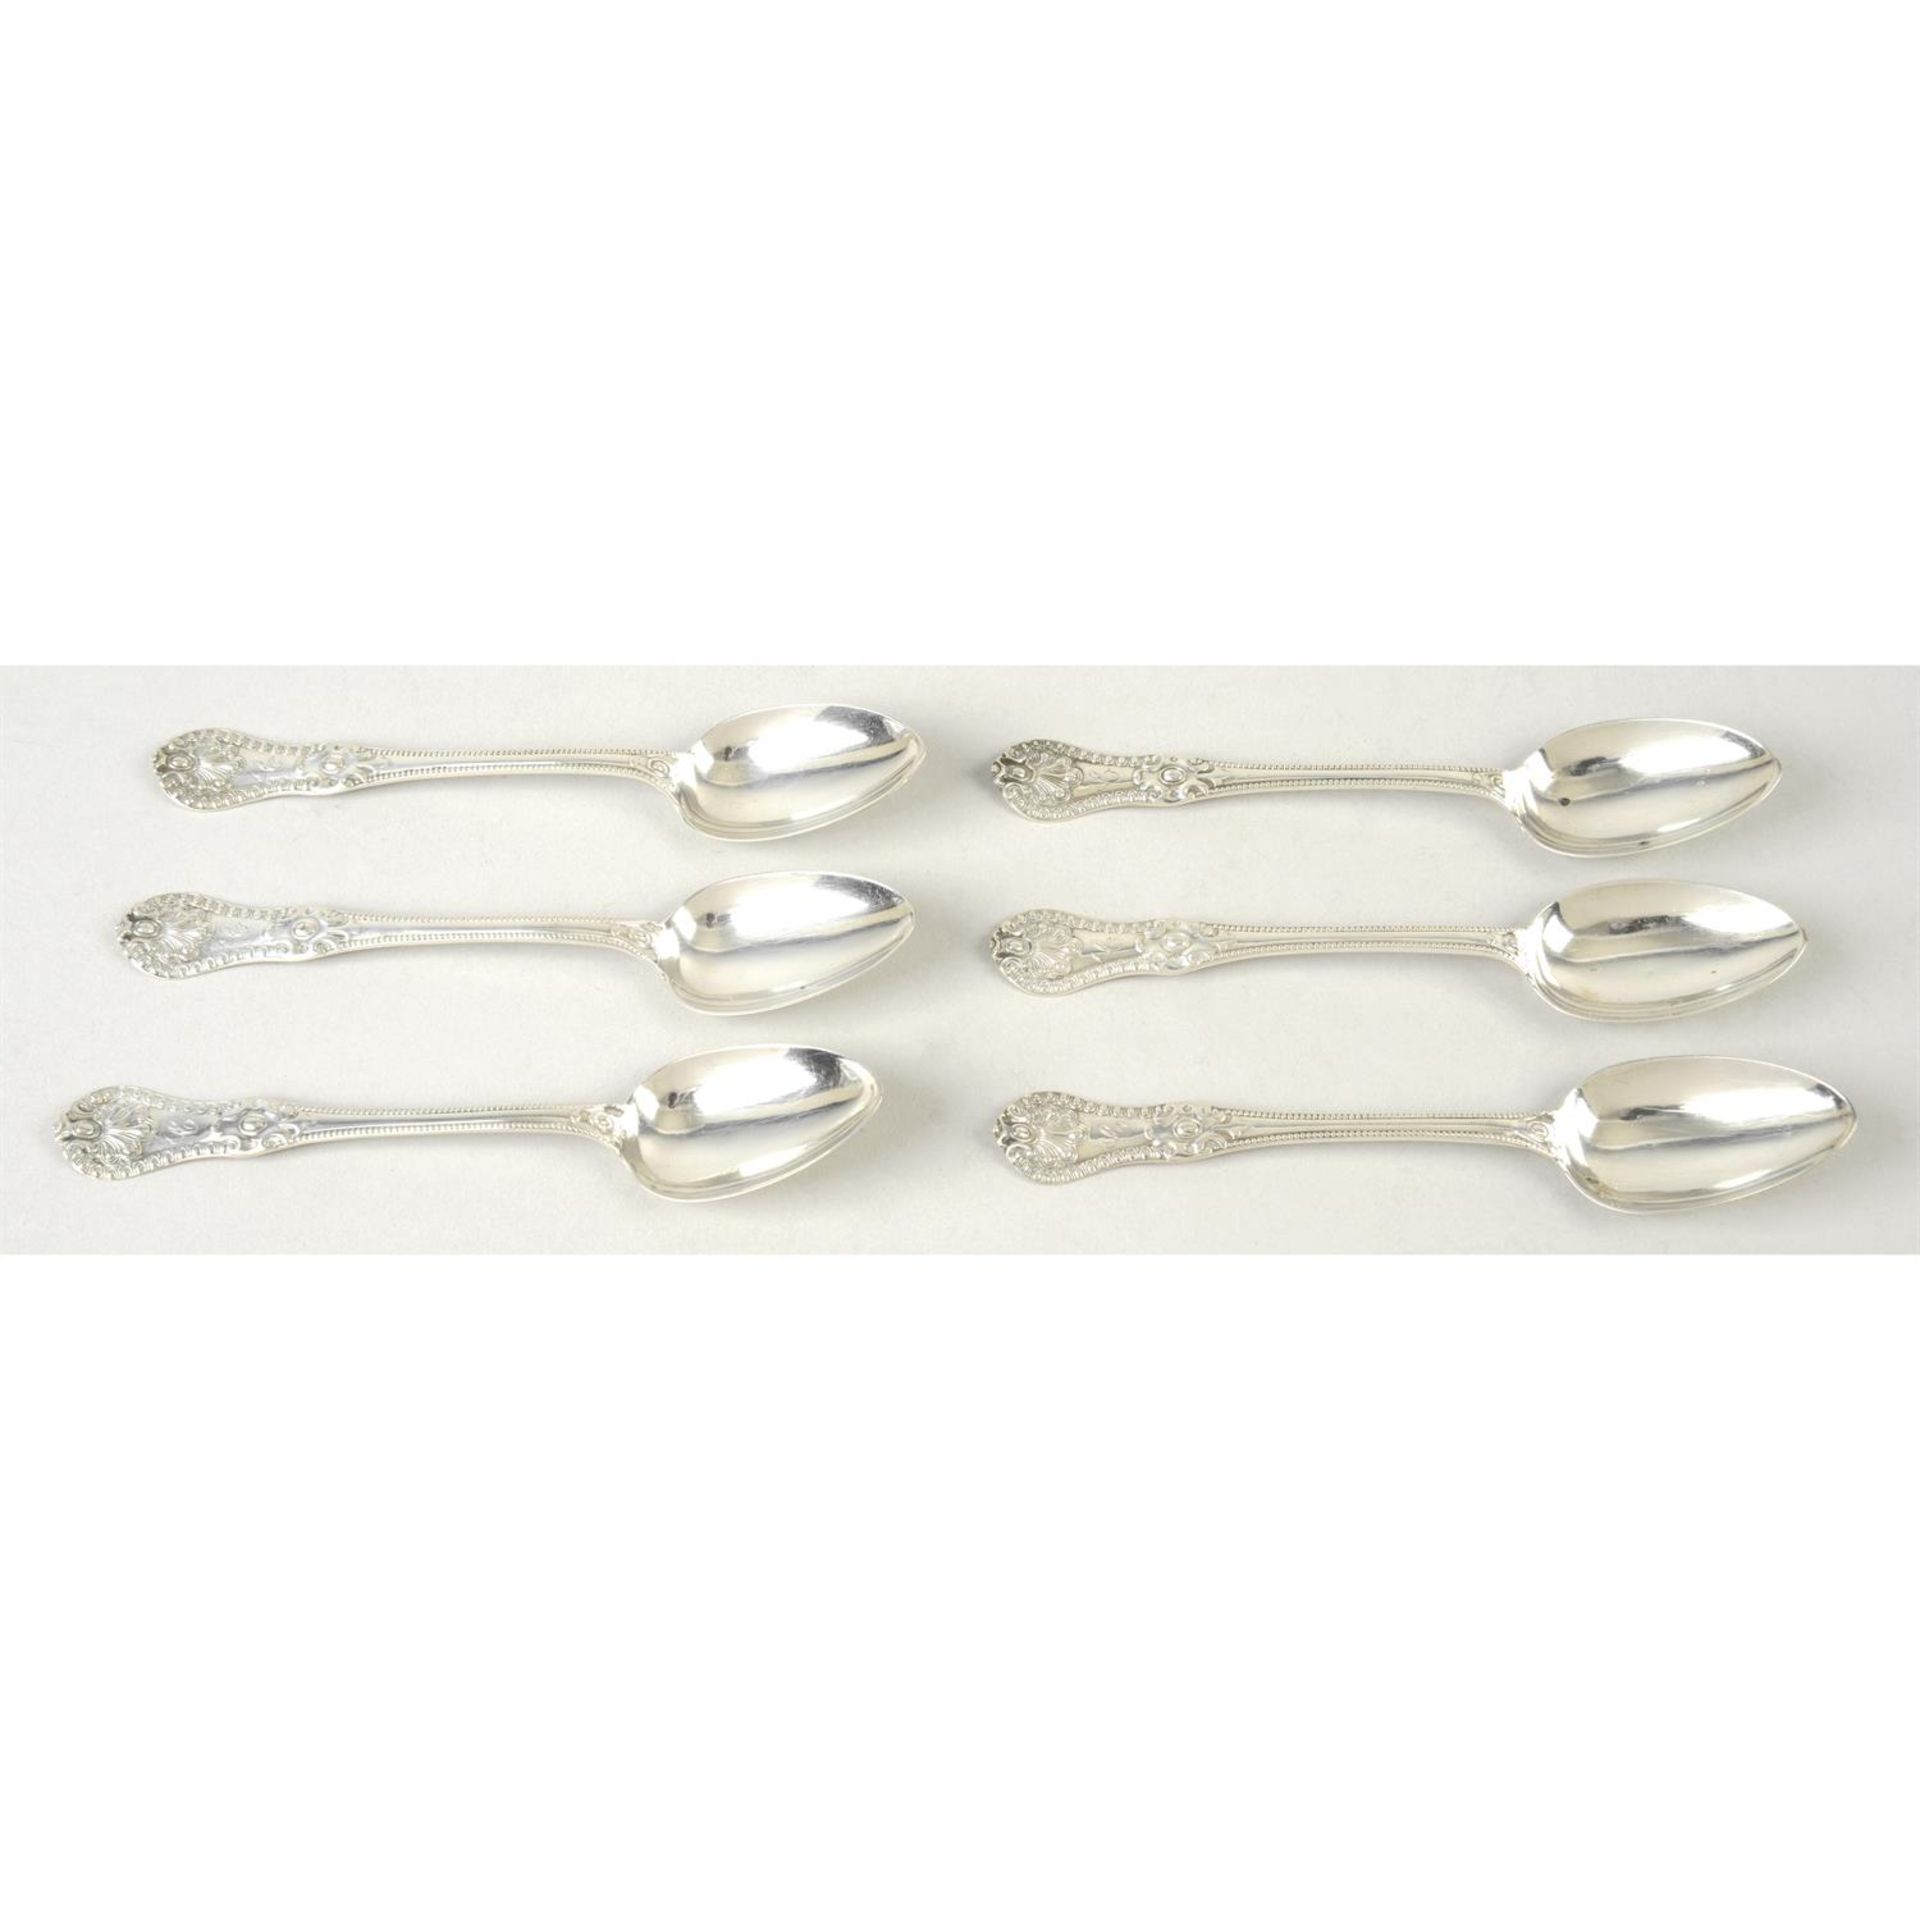 A matched set of six mid-Victorian Glasgow silver teaspoons.